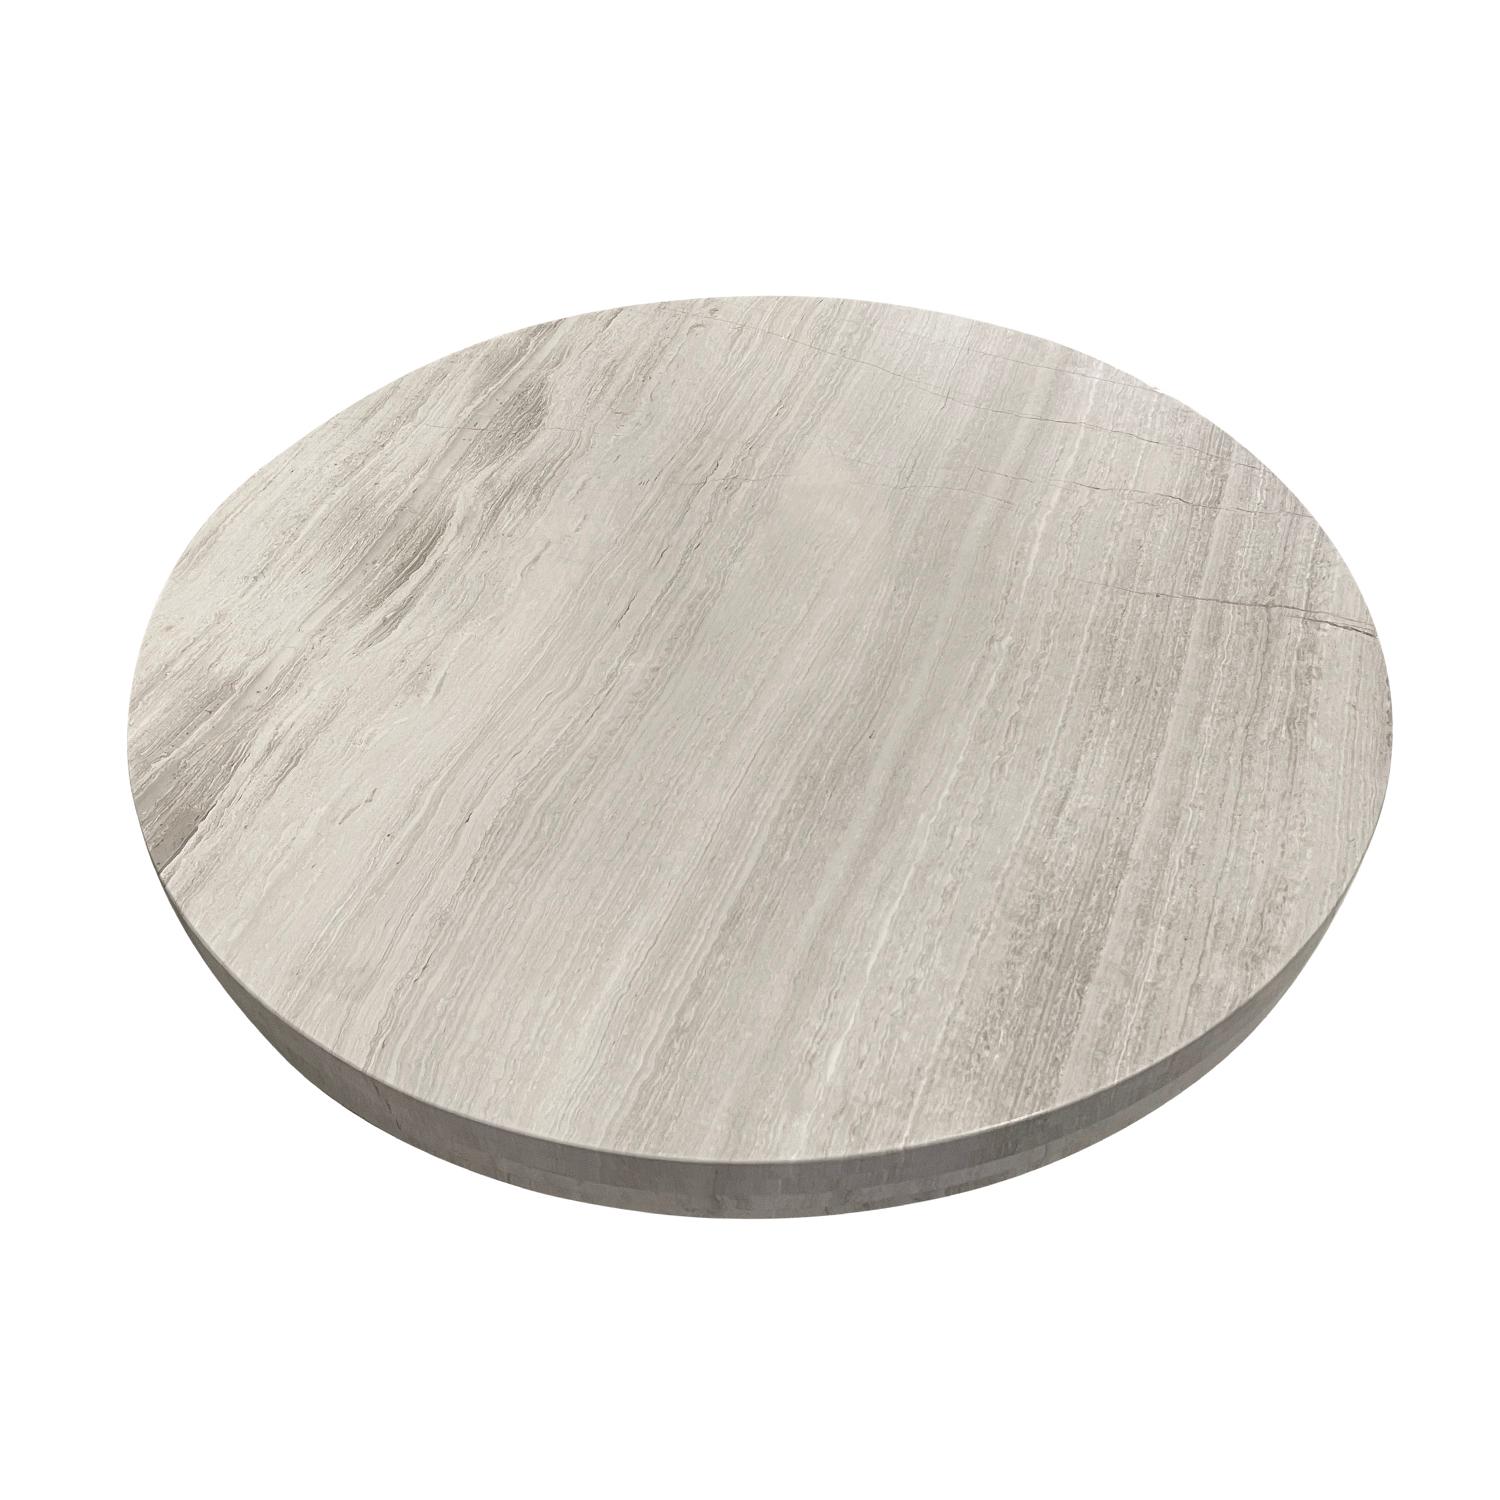 21st Century Italian Minimalist Travertine Coffee Table - Round Sofa Table In Good Condition For Sale In West Palm Beach, FL